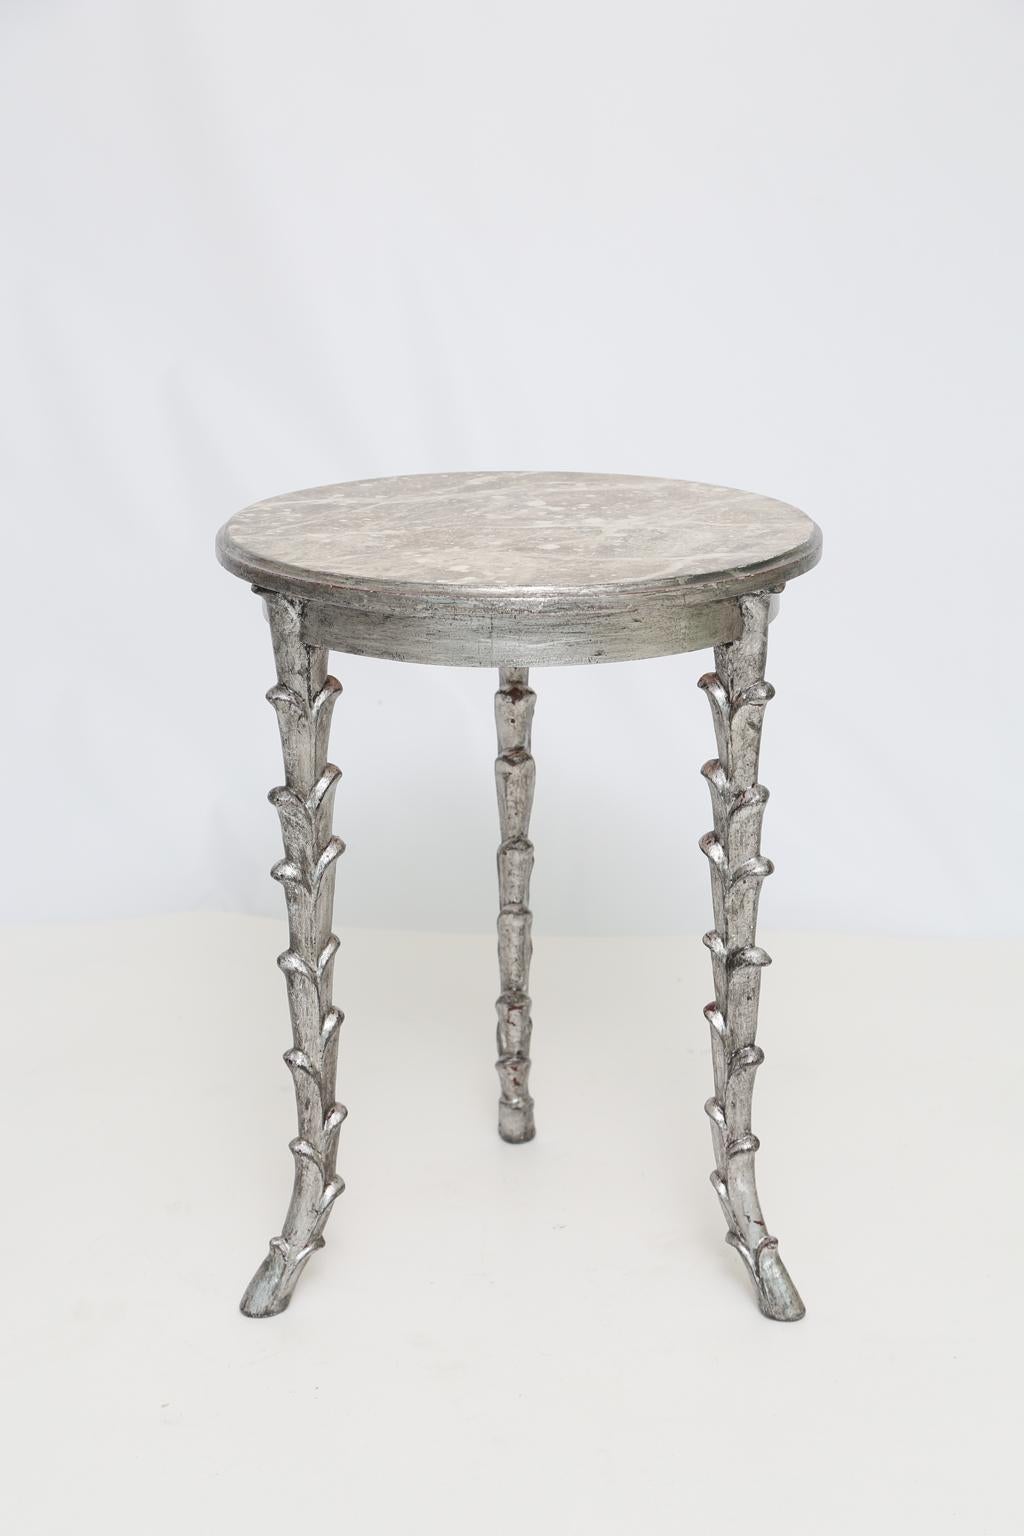 Gilt Silvergilt Accent Table with Foliate Legs For Sale